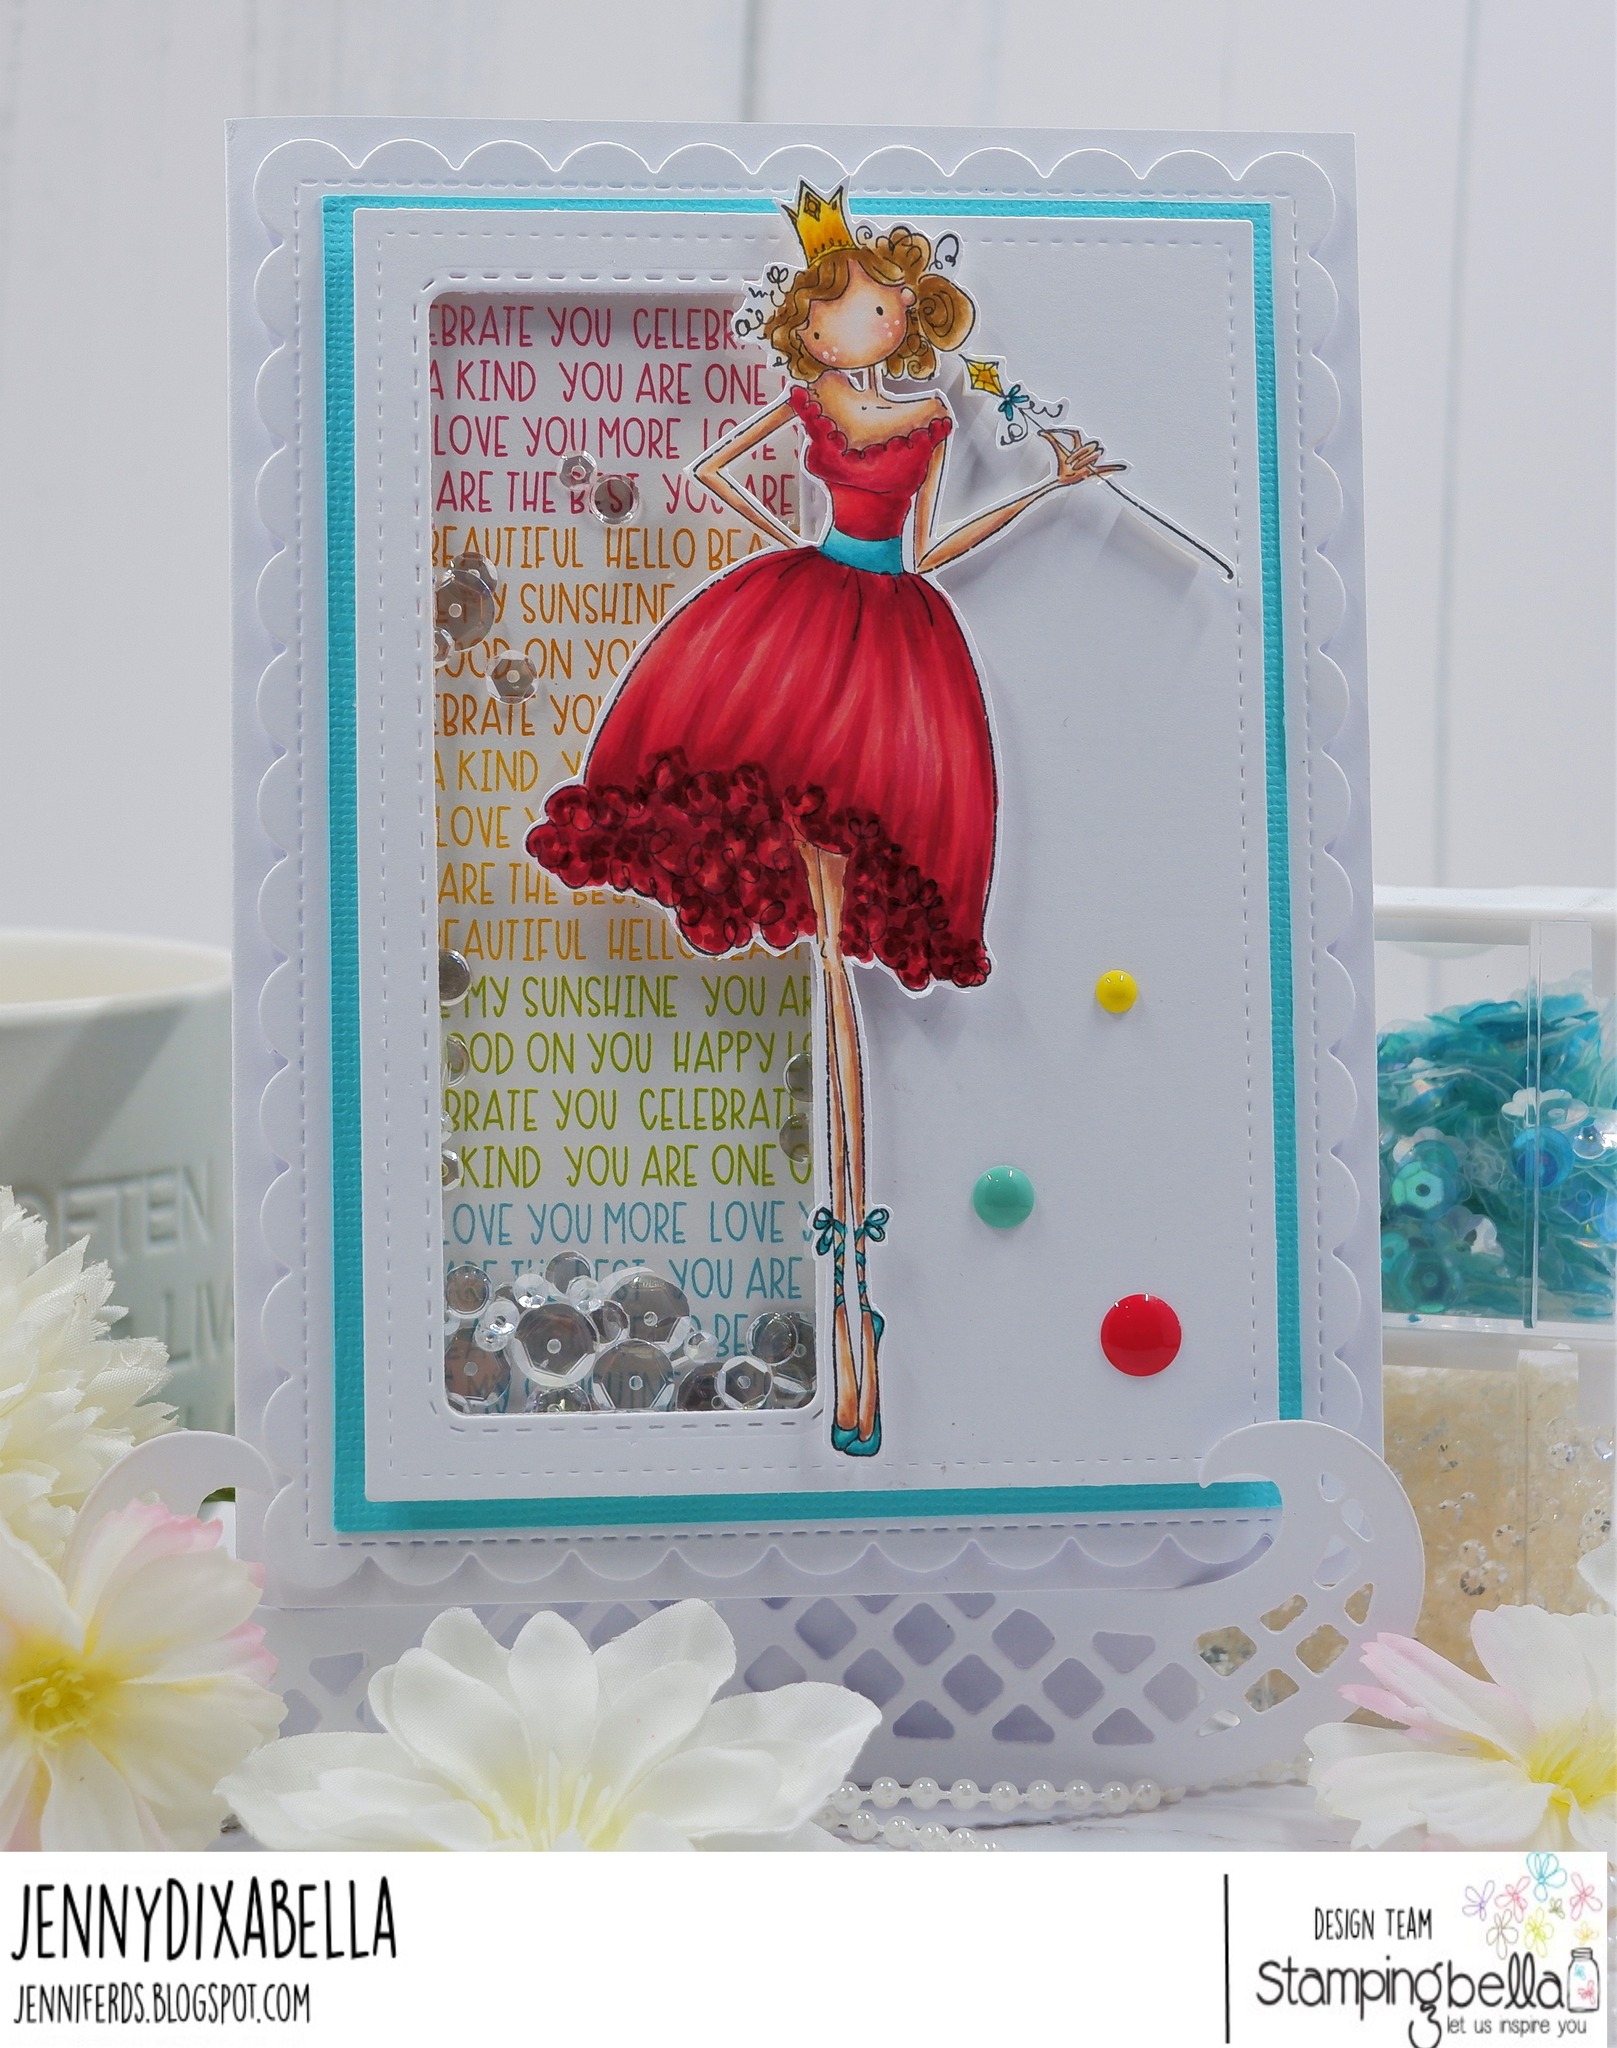 www.stampingbella.com: rubber stamp used:  UPTOWN GIRL FAITH card by Jenny Dix